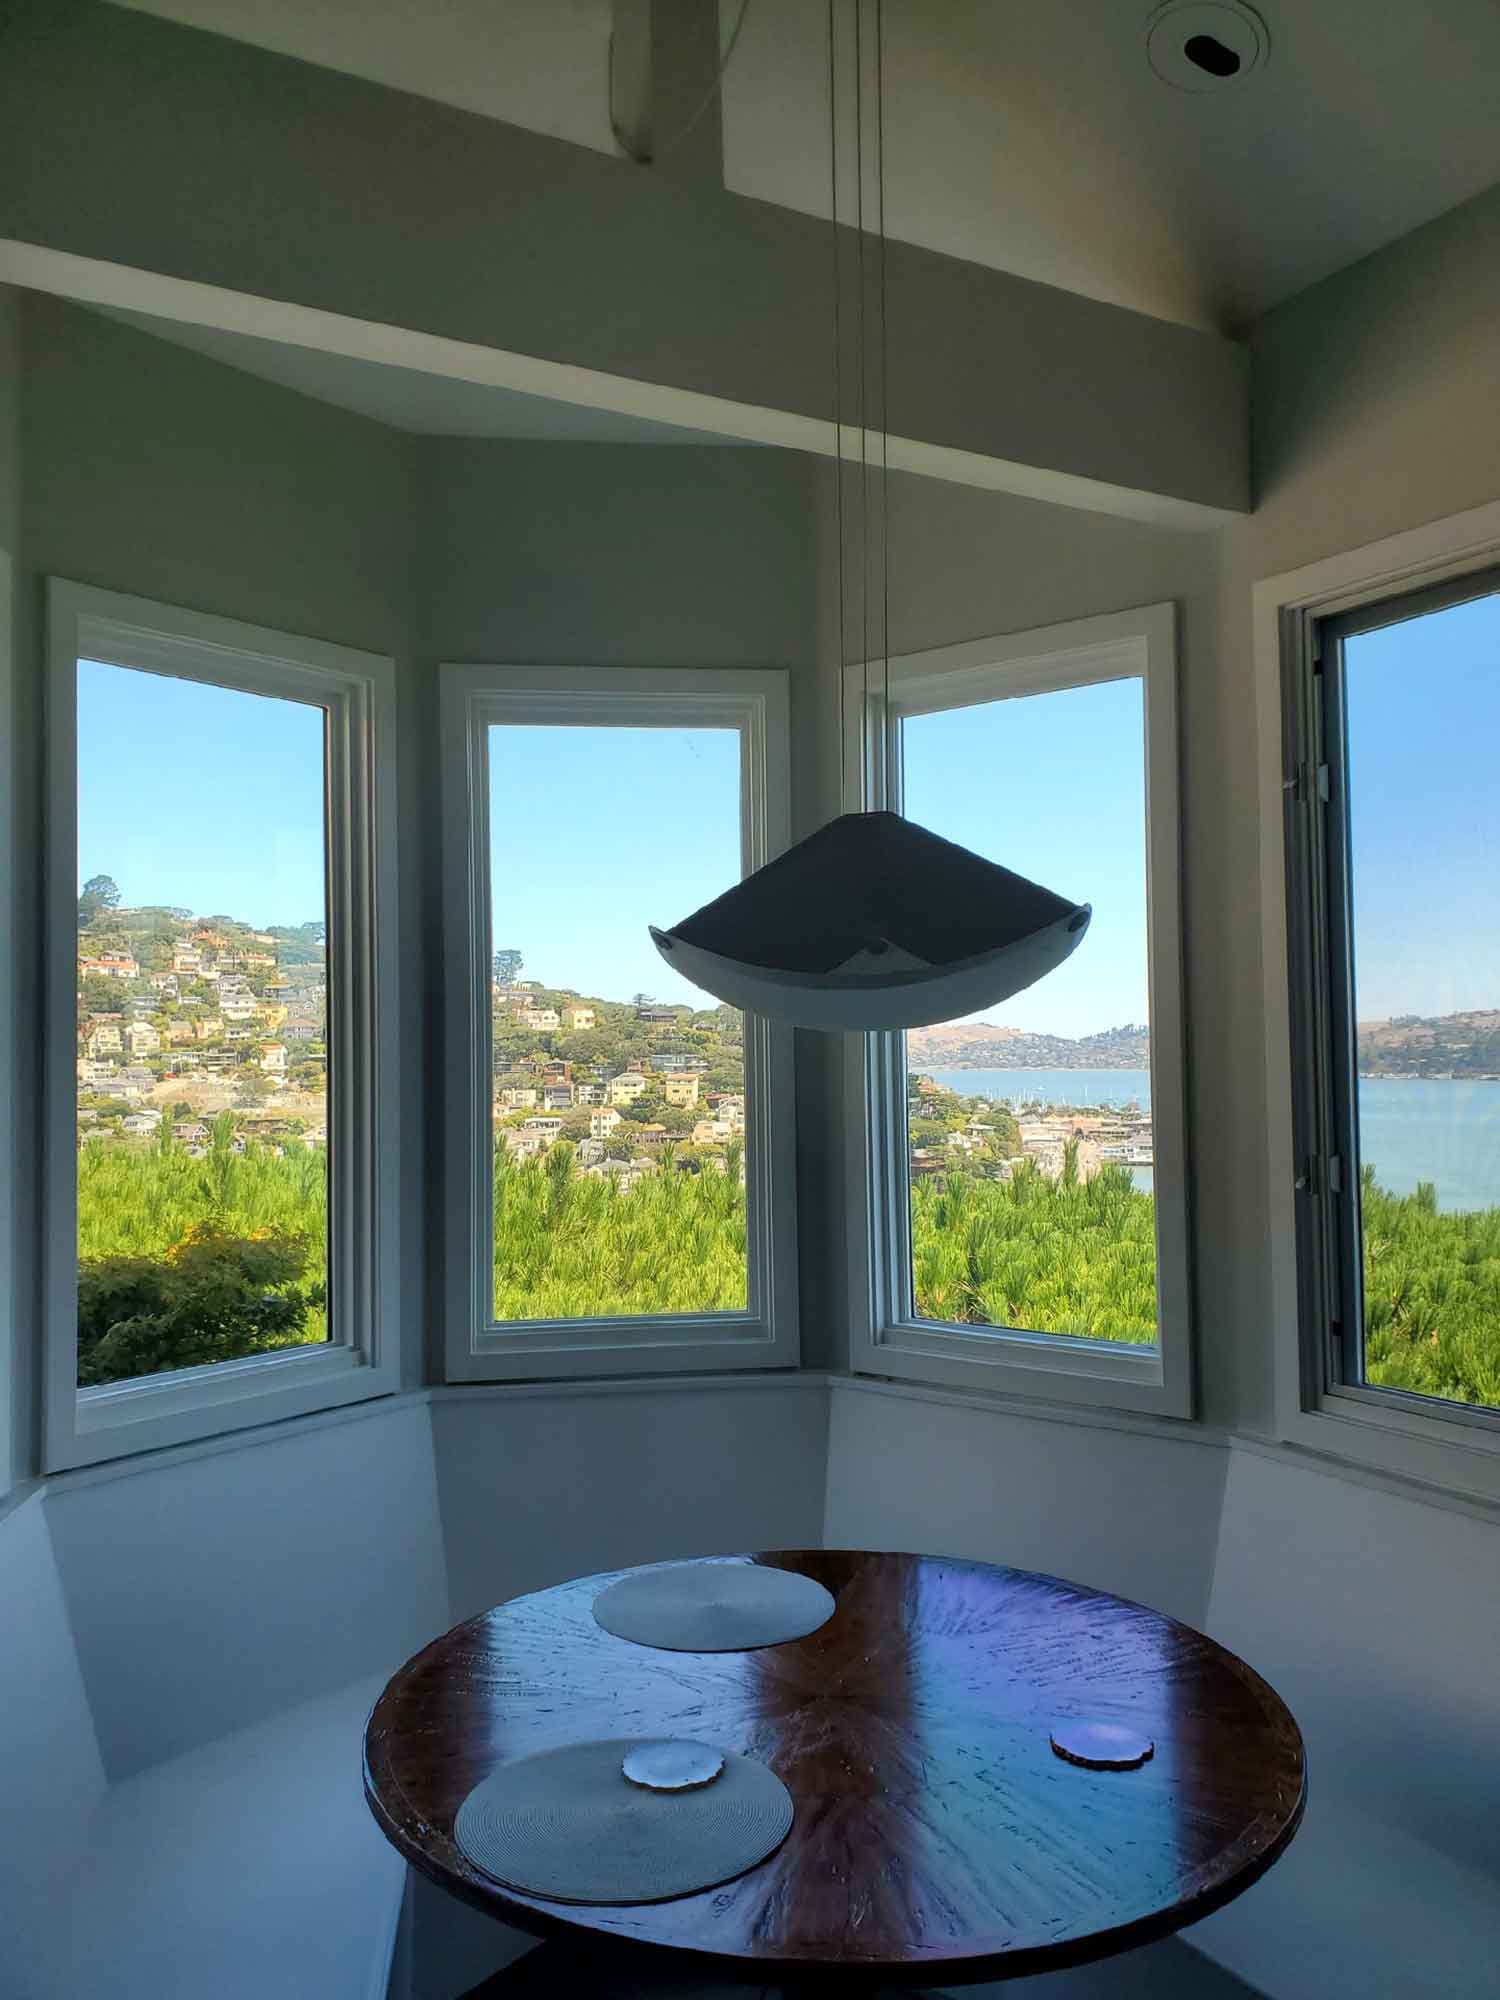 The ClimatePro team had the pleasure of transforming this Sausalito home with 3M Prestige Window Tint.